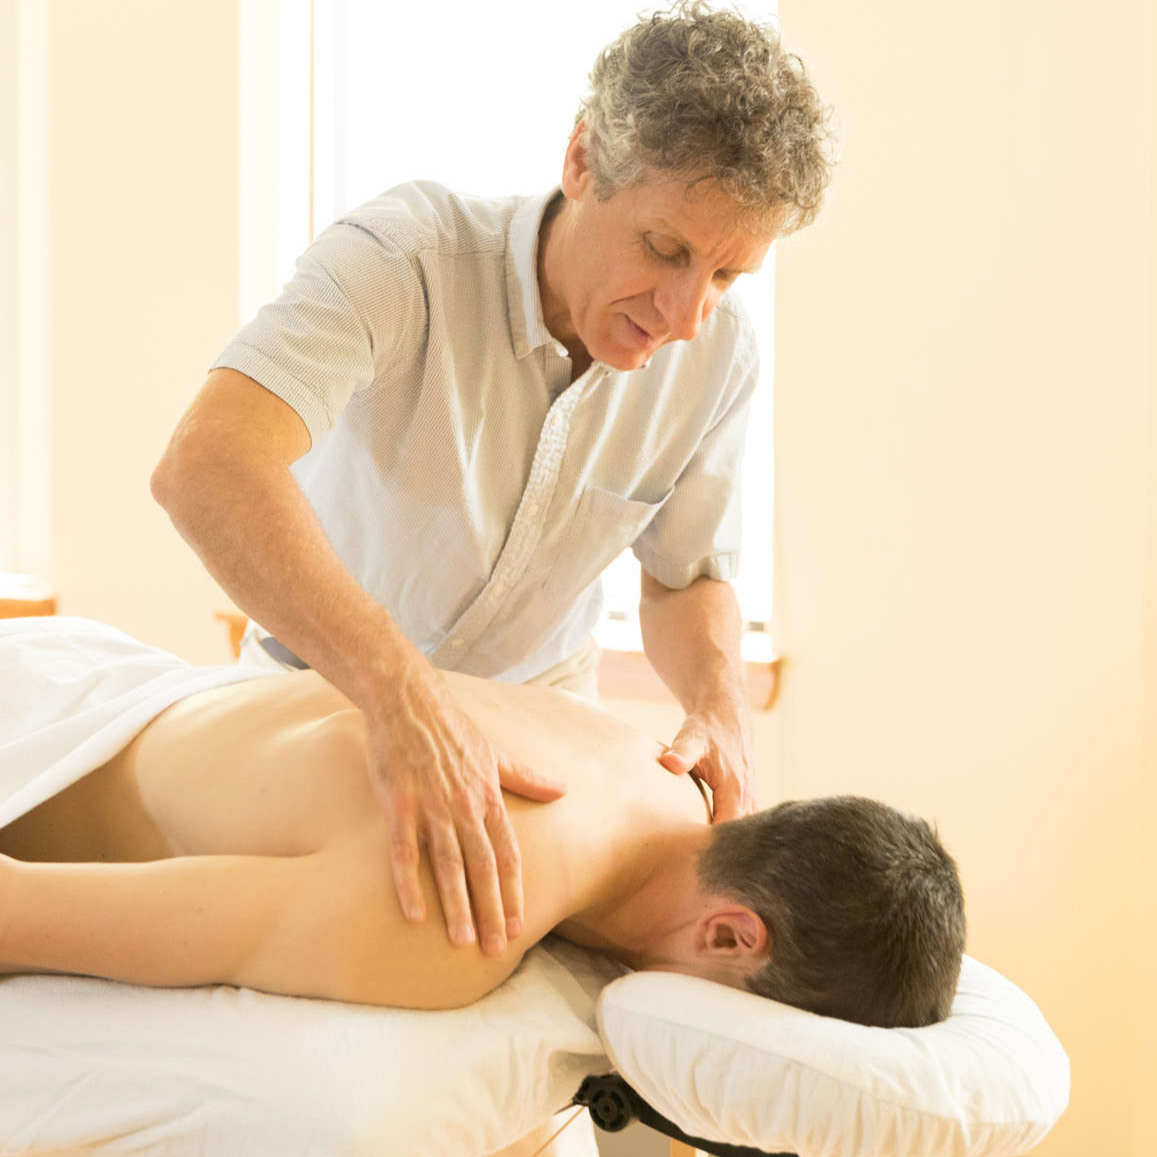 Michael Gelsanliter practices Oncology and Therapeutic Massage